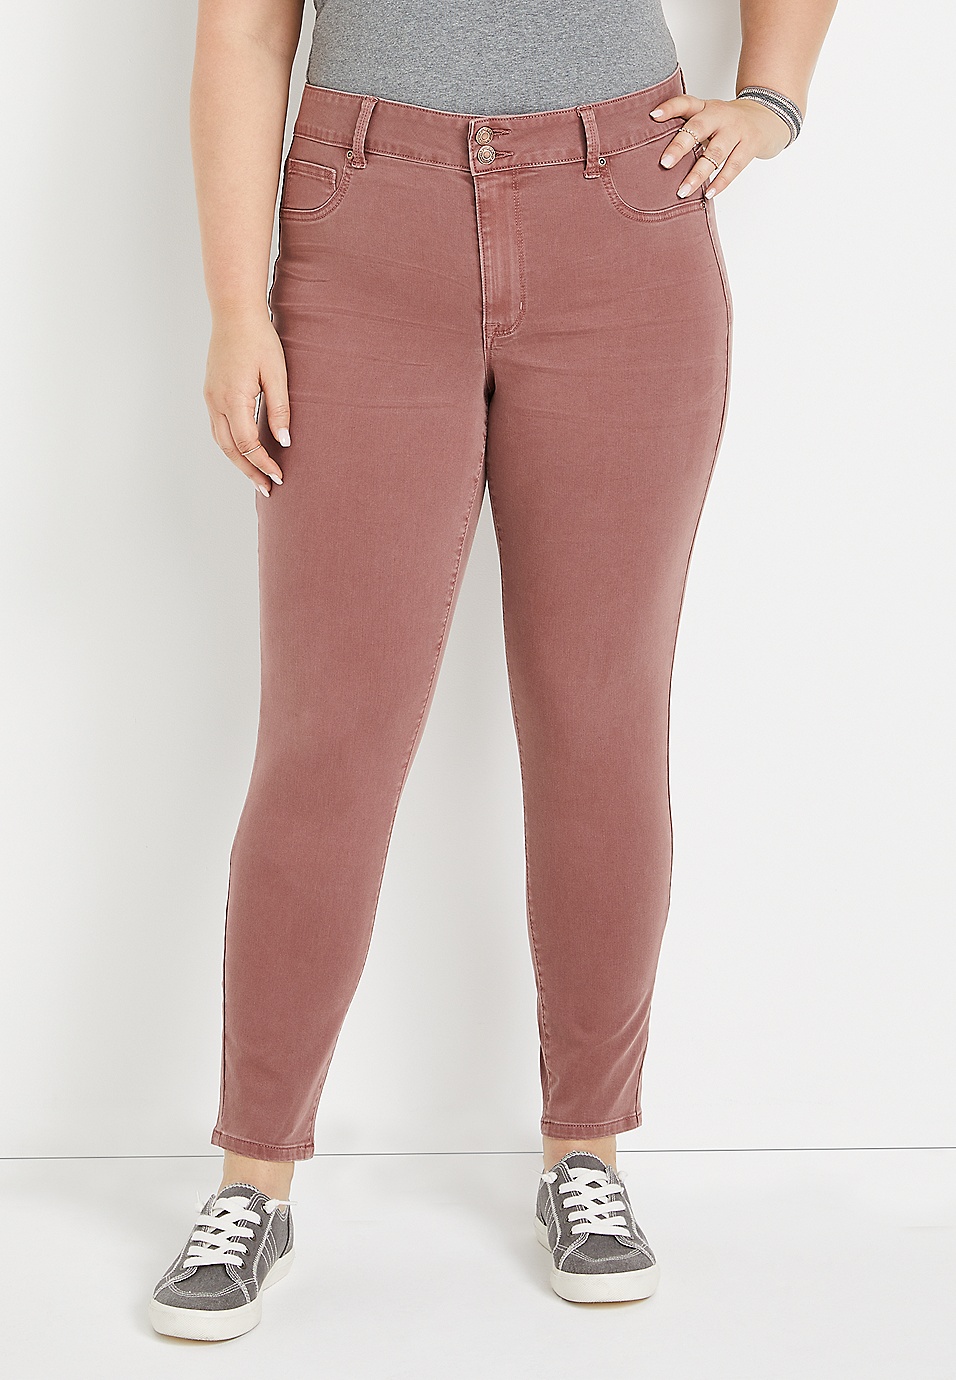 Plus jeans by maurices™ Dark Pink Rise Button Jegging Made With REPREVE® | maurices